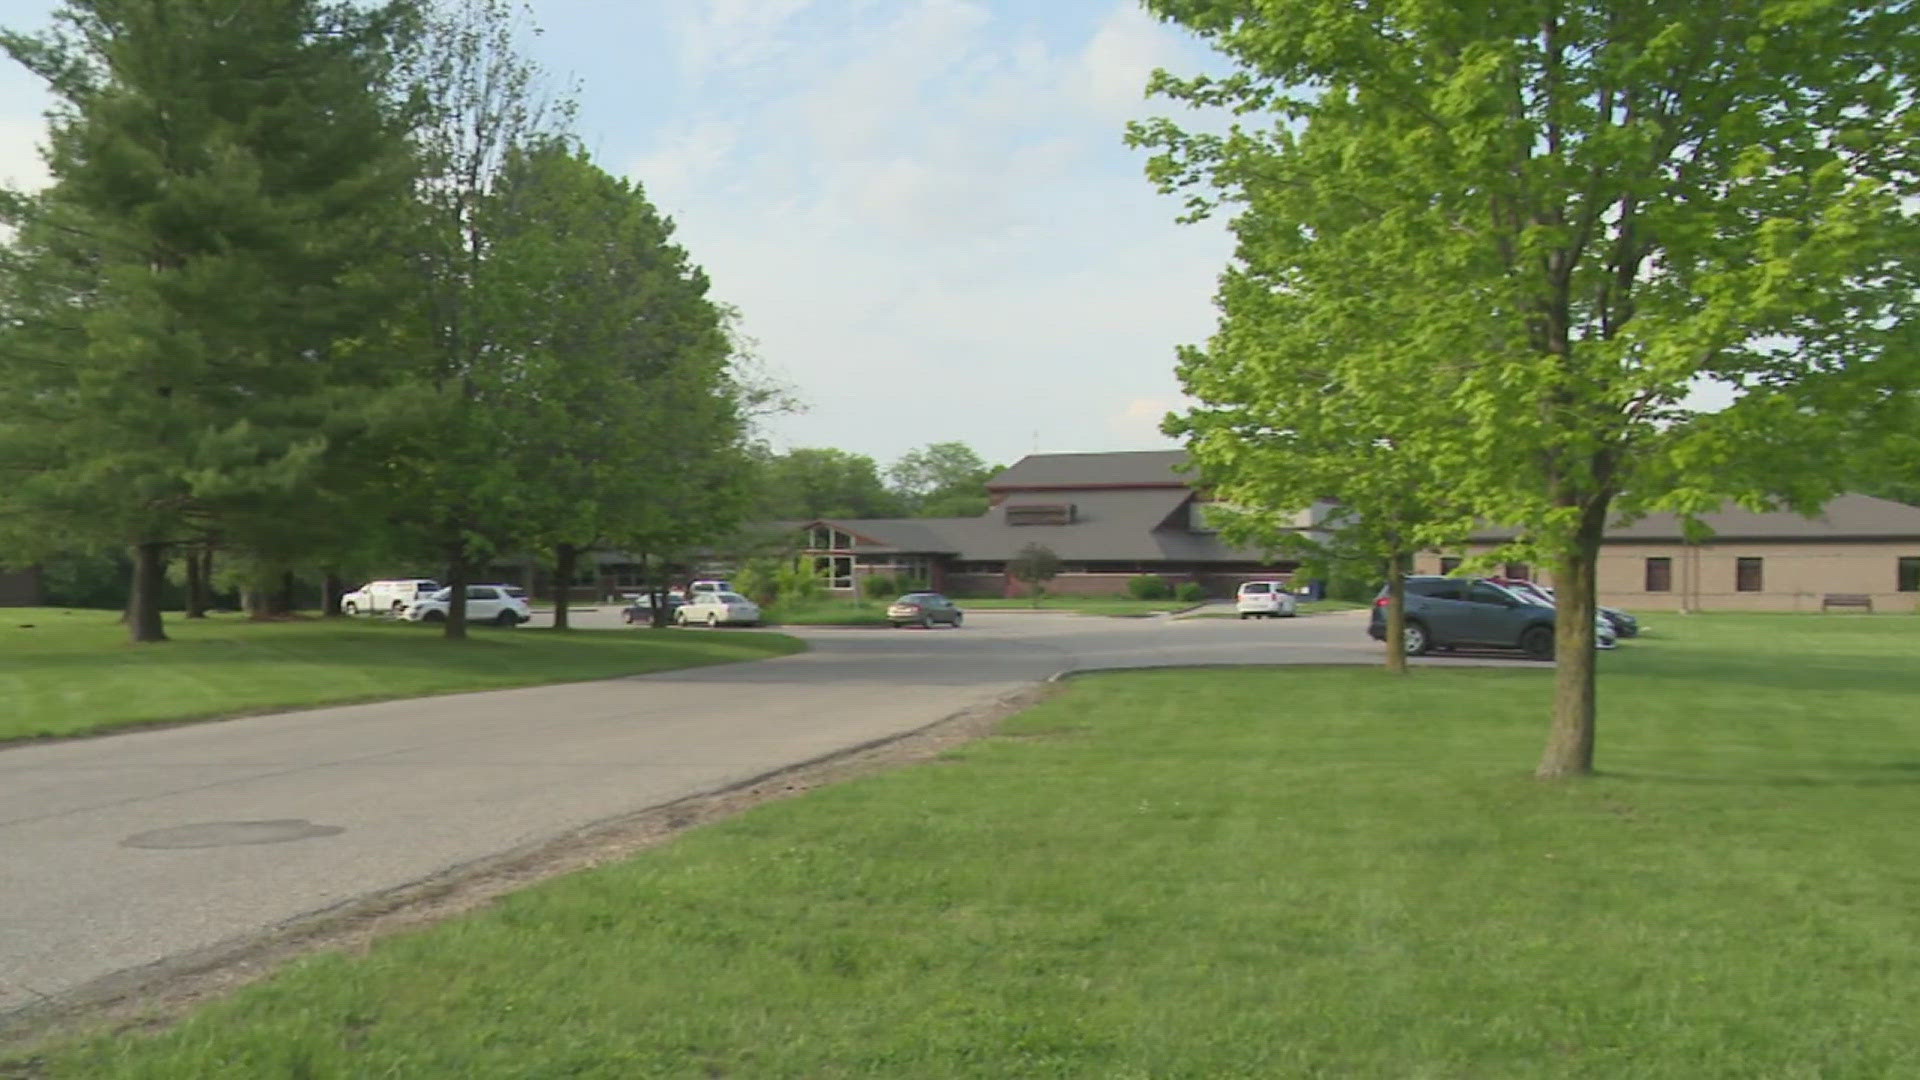 The fifteen-year-old suspect allegedly assaulted a health center staff member in Johnston, Iowa. This attack led to the staff member's death.